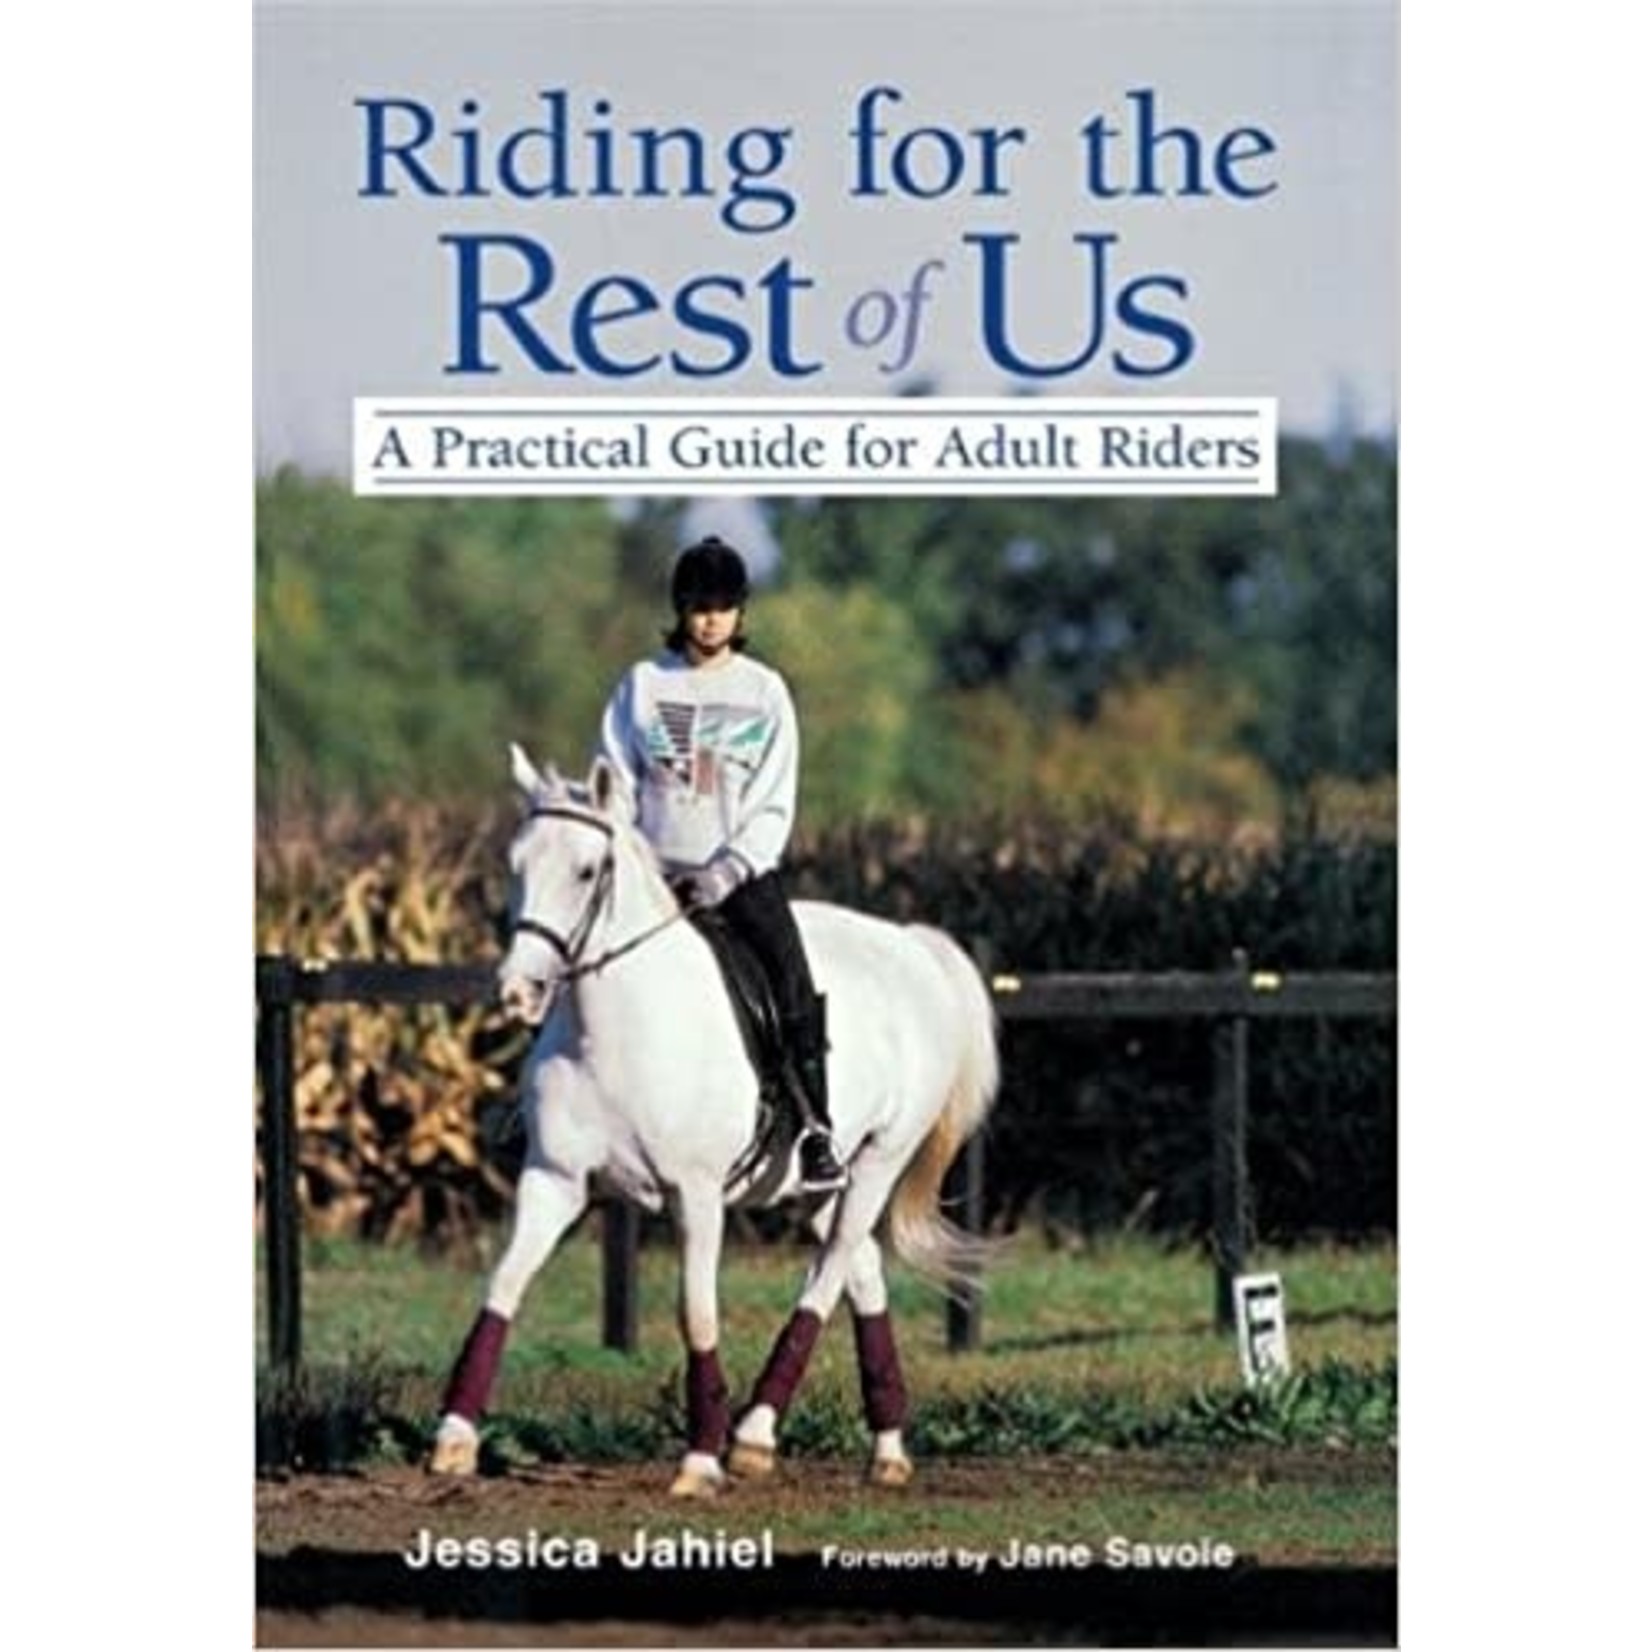 The Riding for the Rest of Us